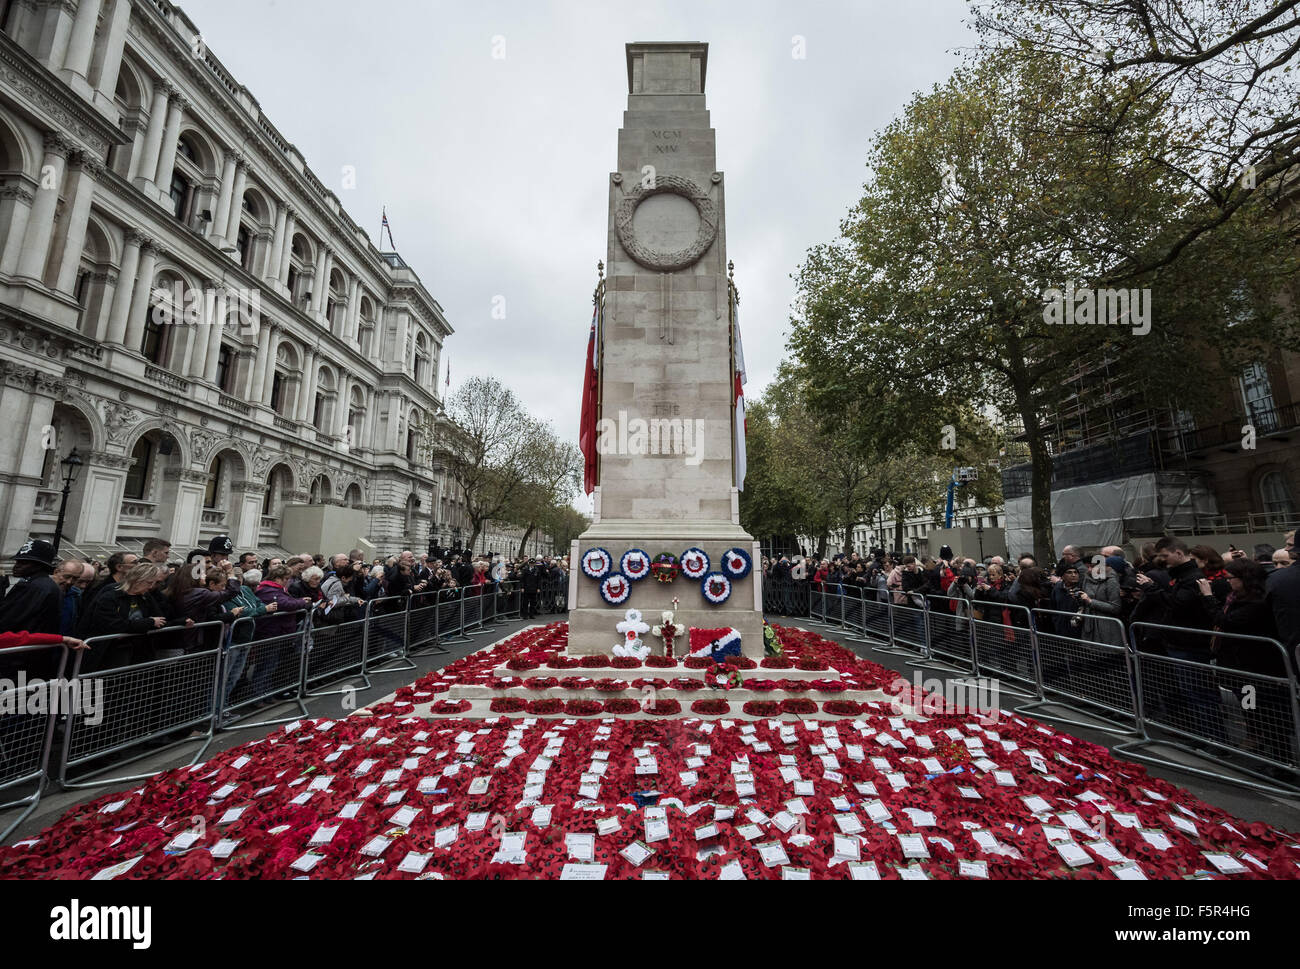 London, UK. 8th November, 2015. Remembrance Day Poppy Wreaths at The